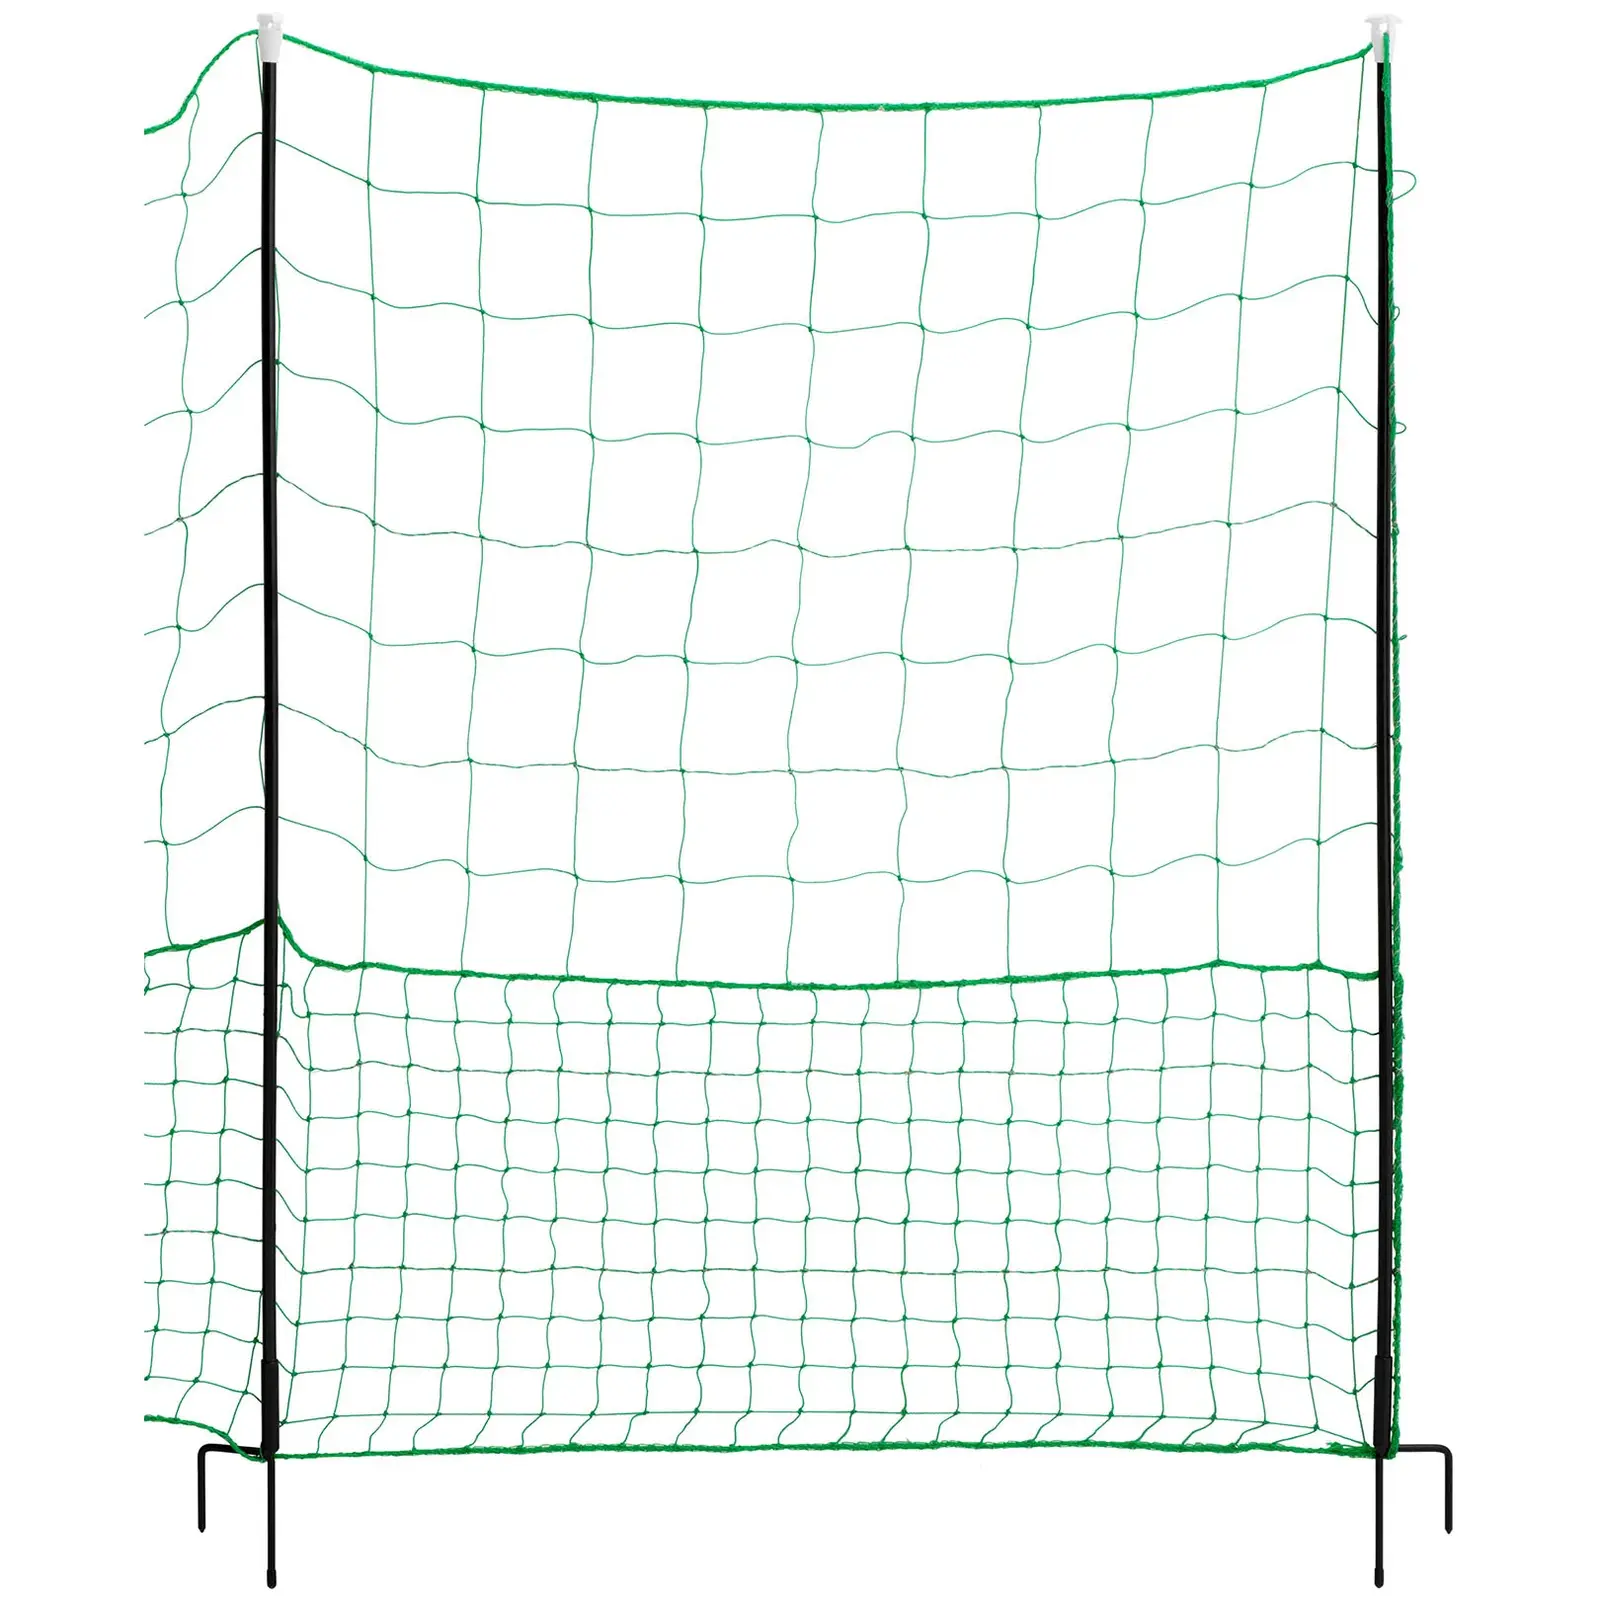 Chicken Wire - height 125 cm - length 15 m - without electricity